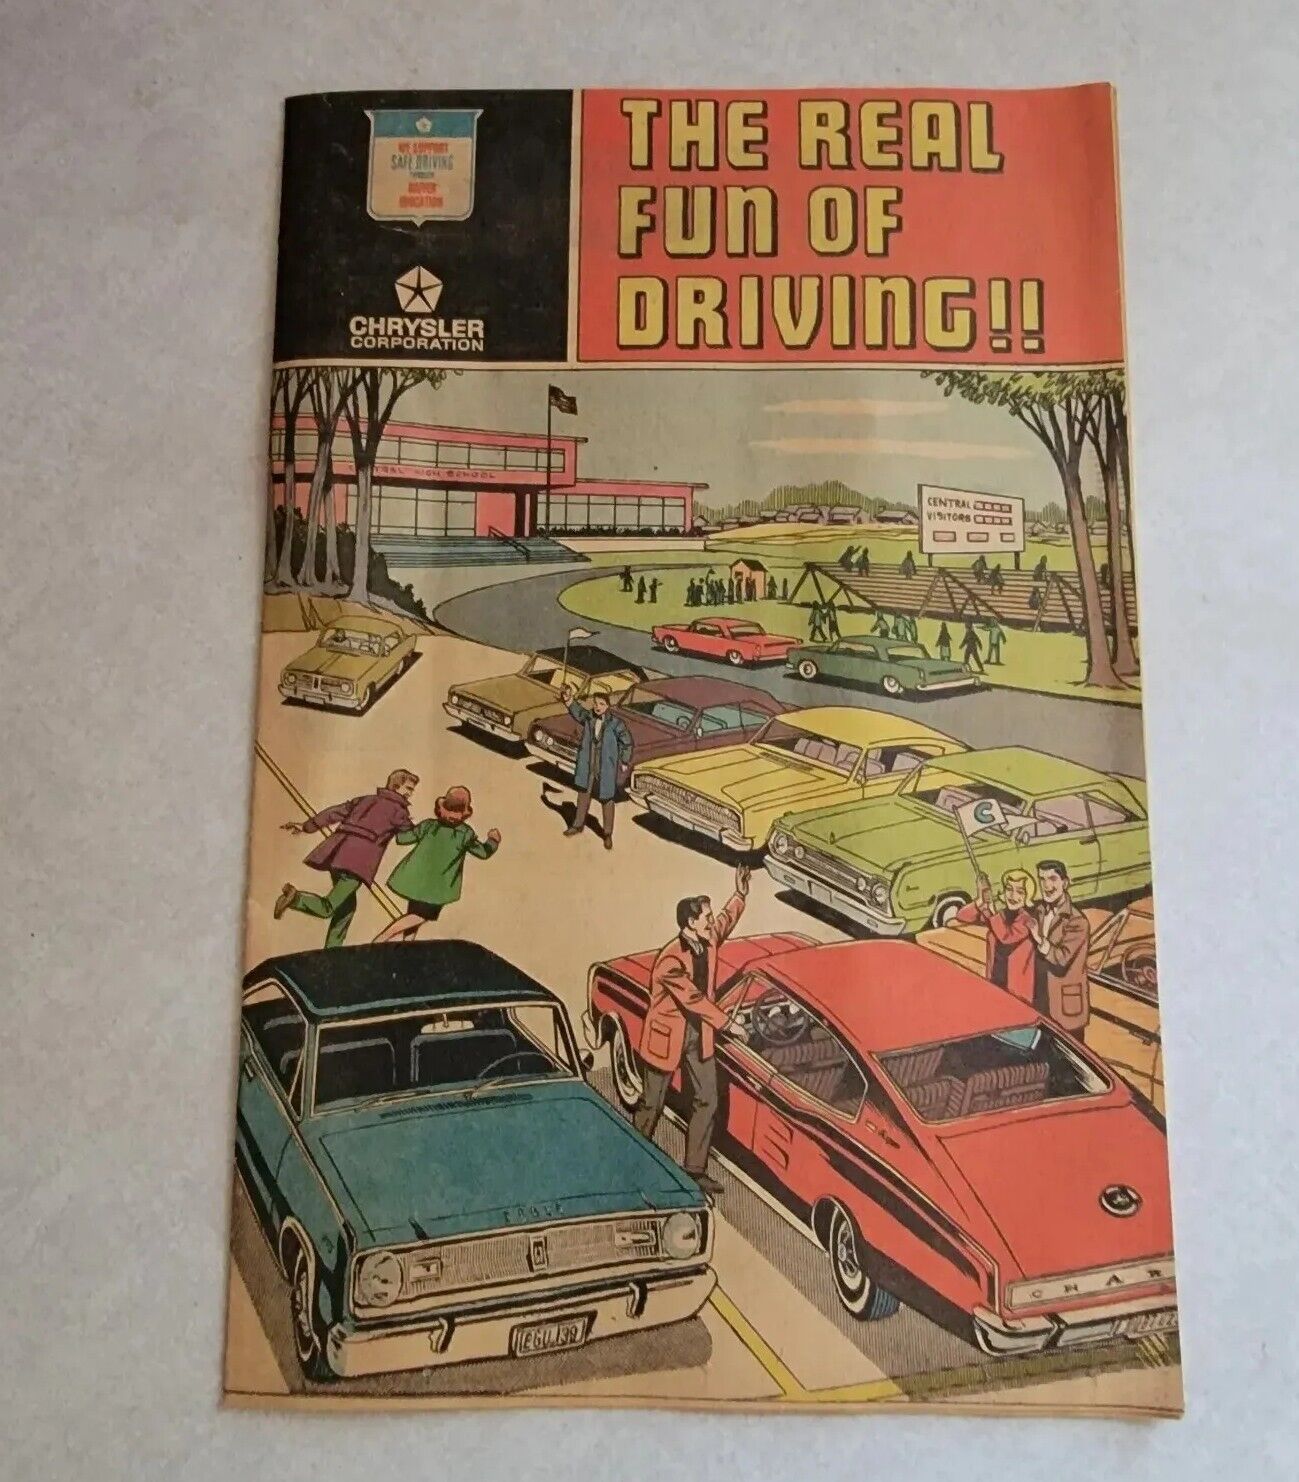 Vintage 1967 CHRYSLER Motors Corp The Real FUN of DRIVING Comic Book Drivers Ed